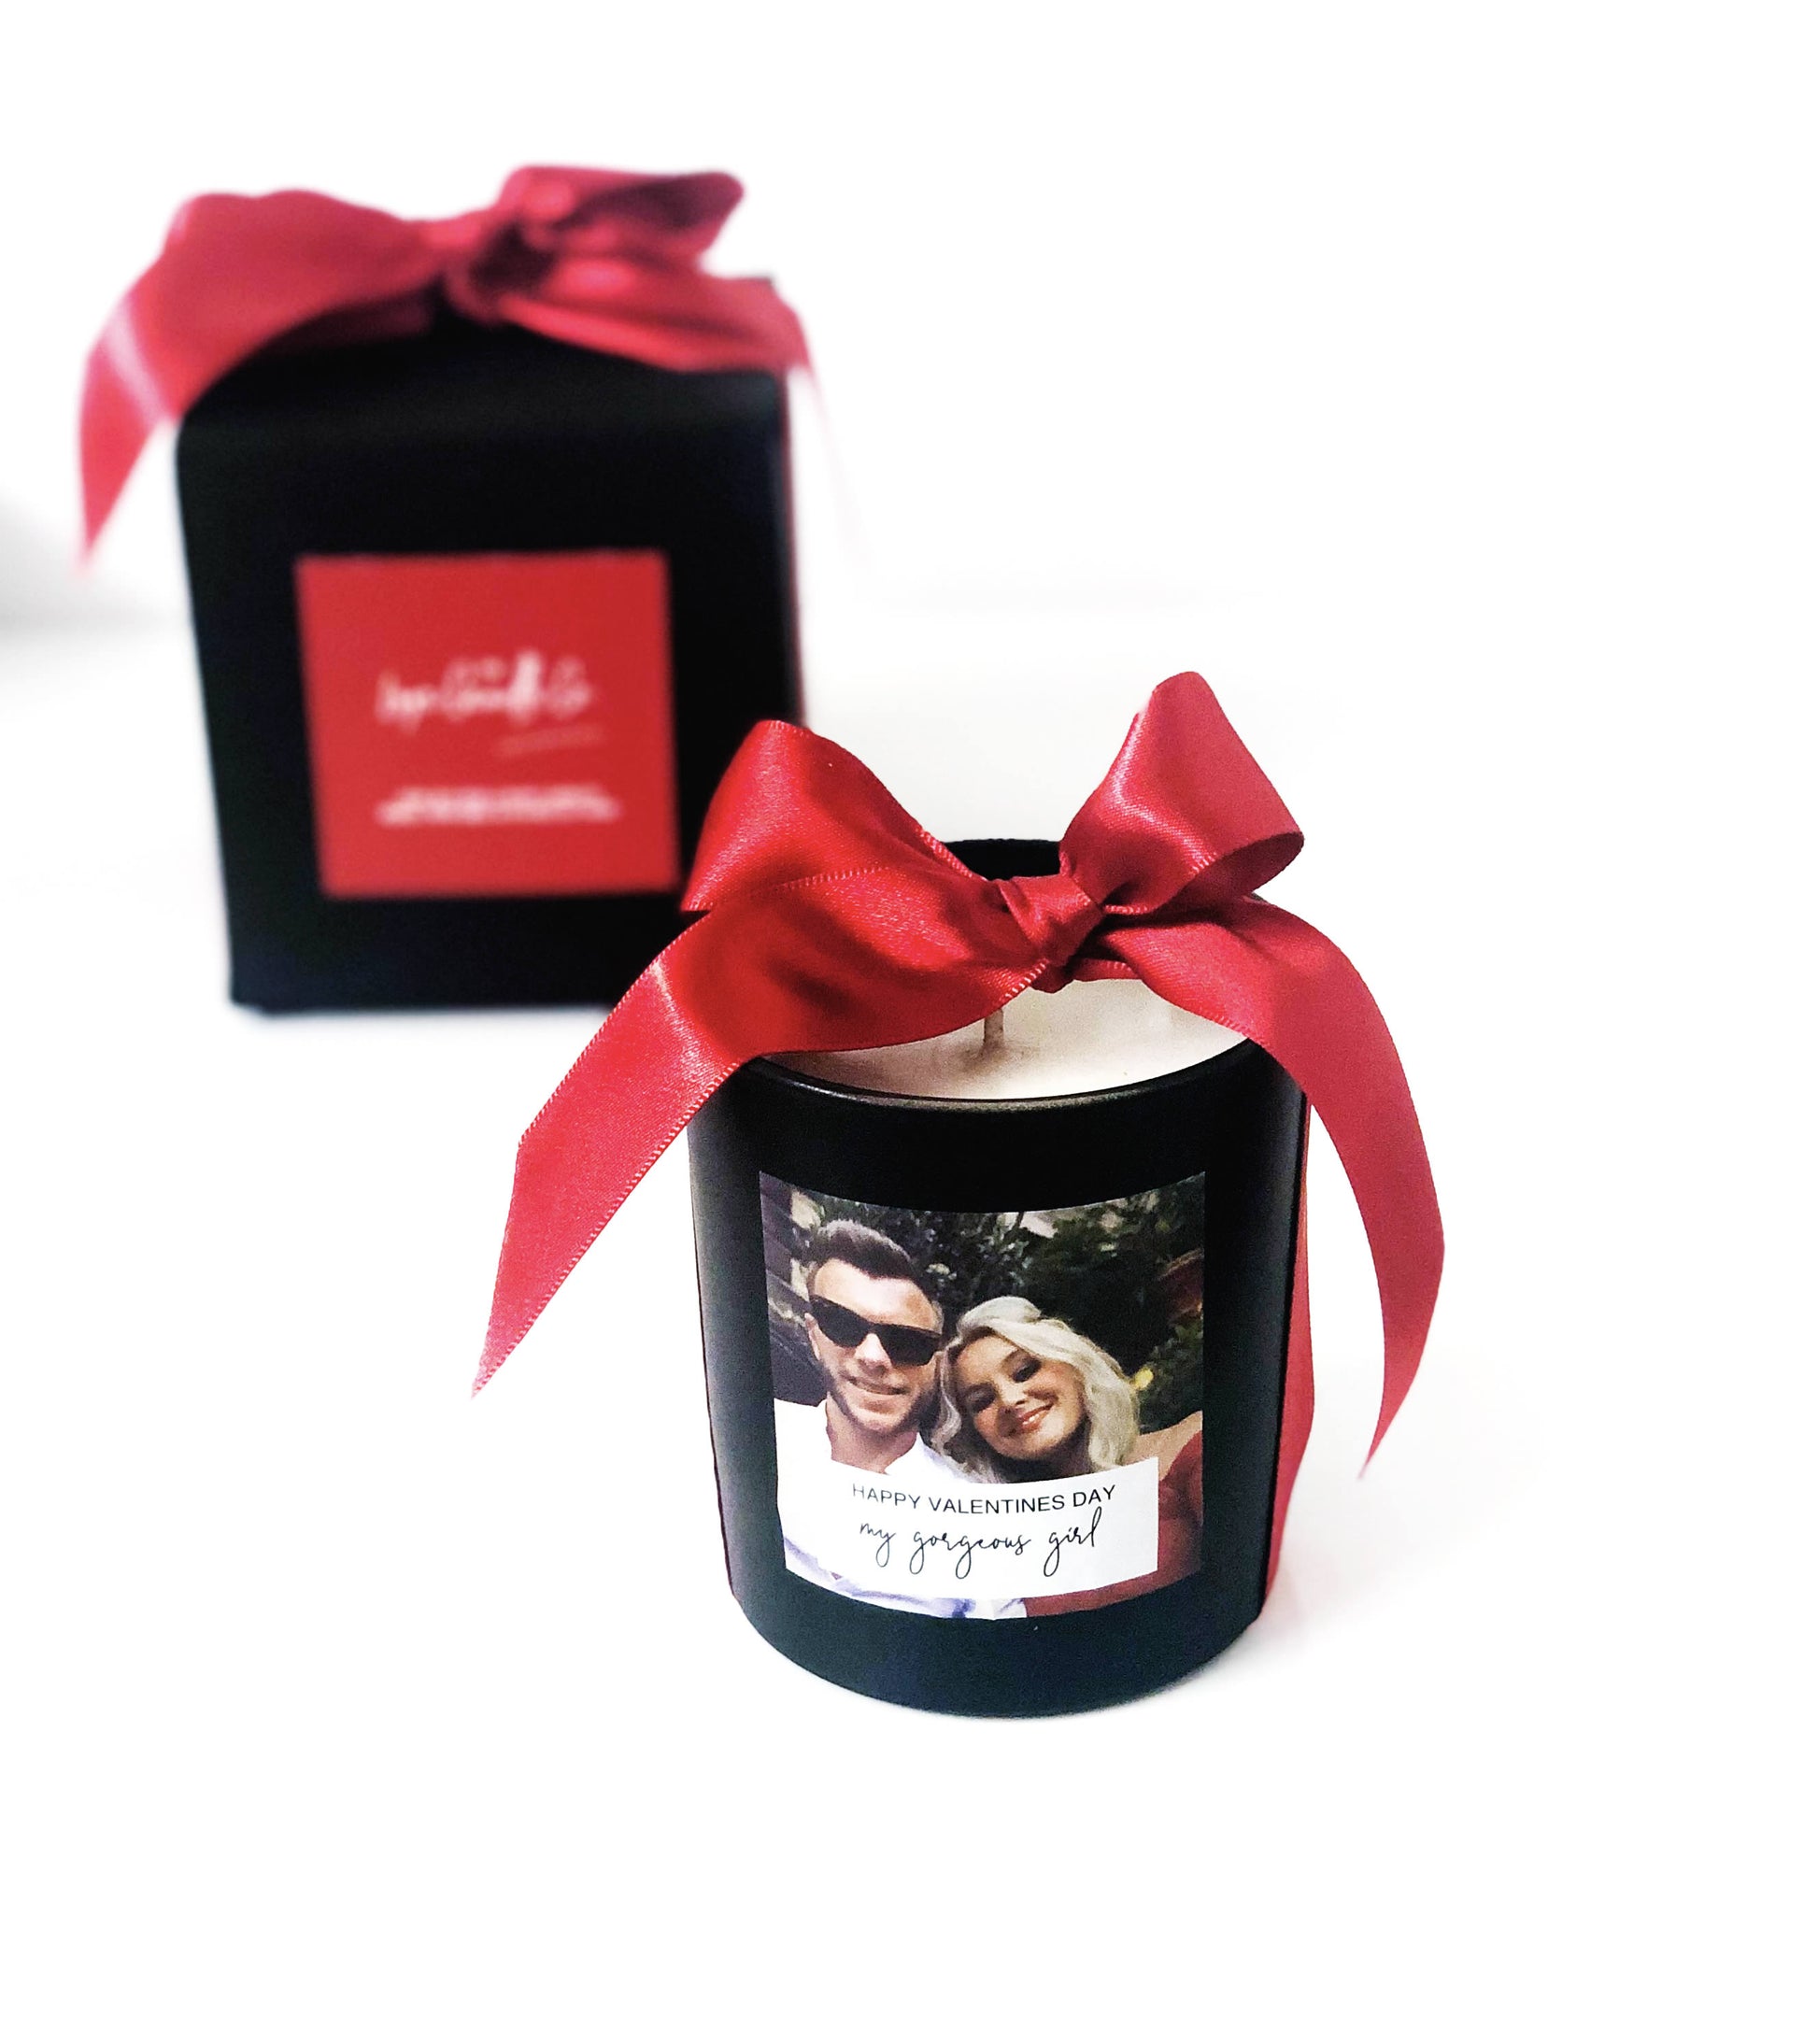 Personalised photo candle valentines gift in black soy wax with big red satin bow